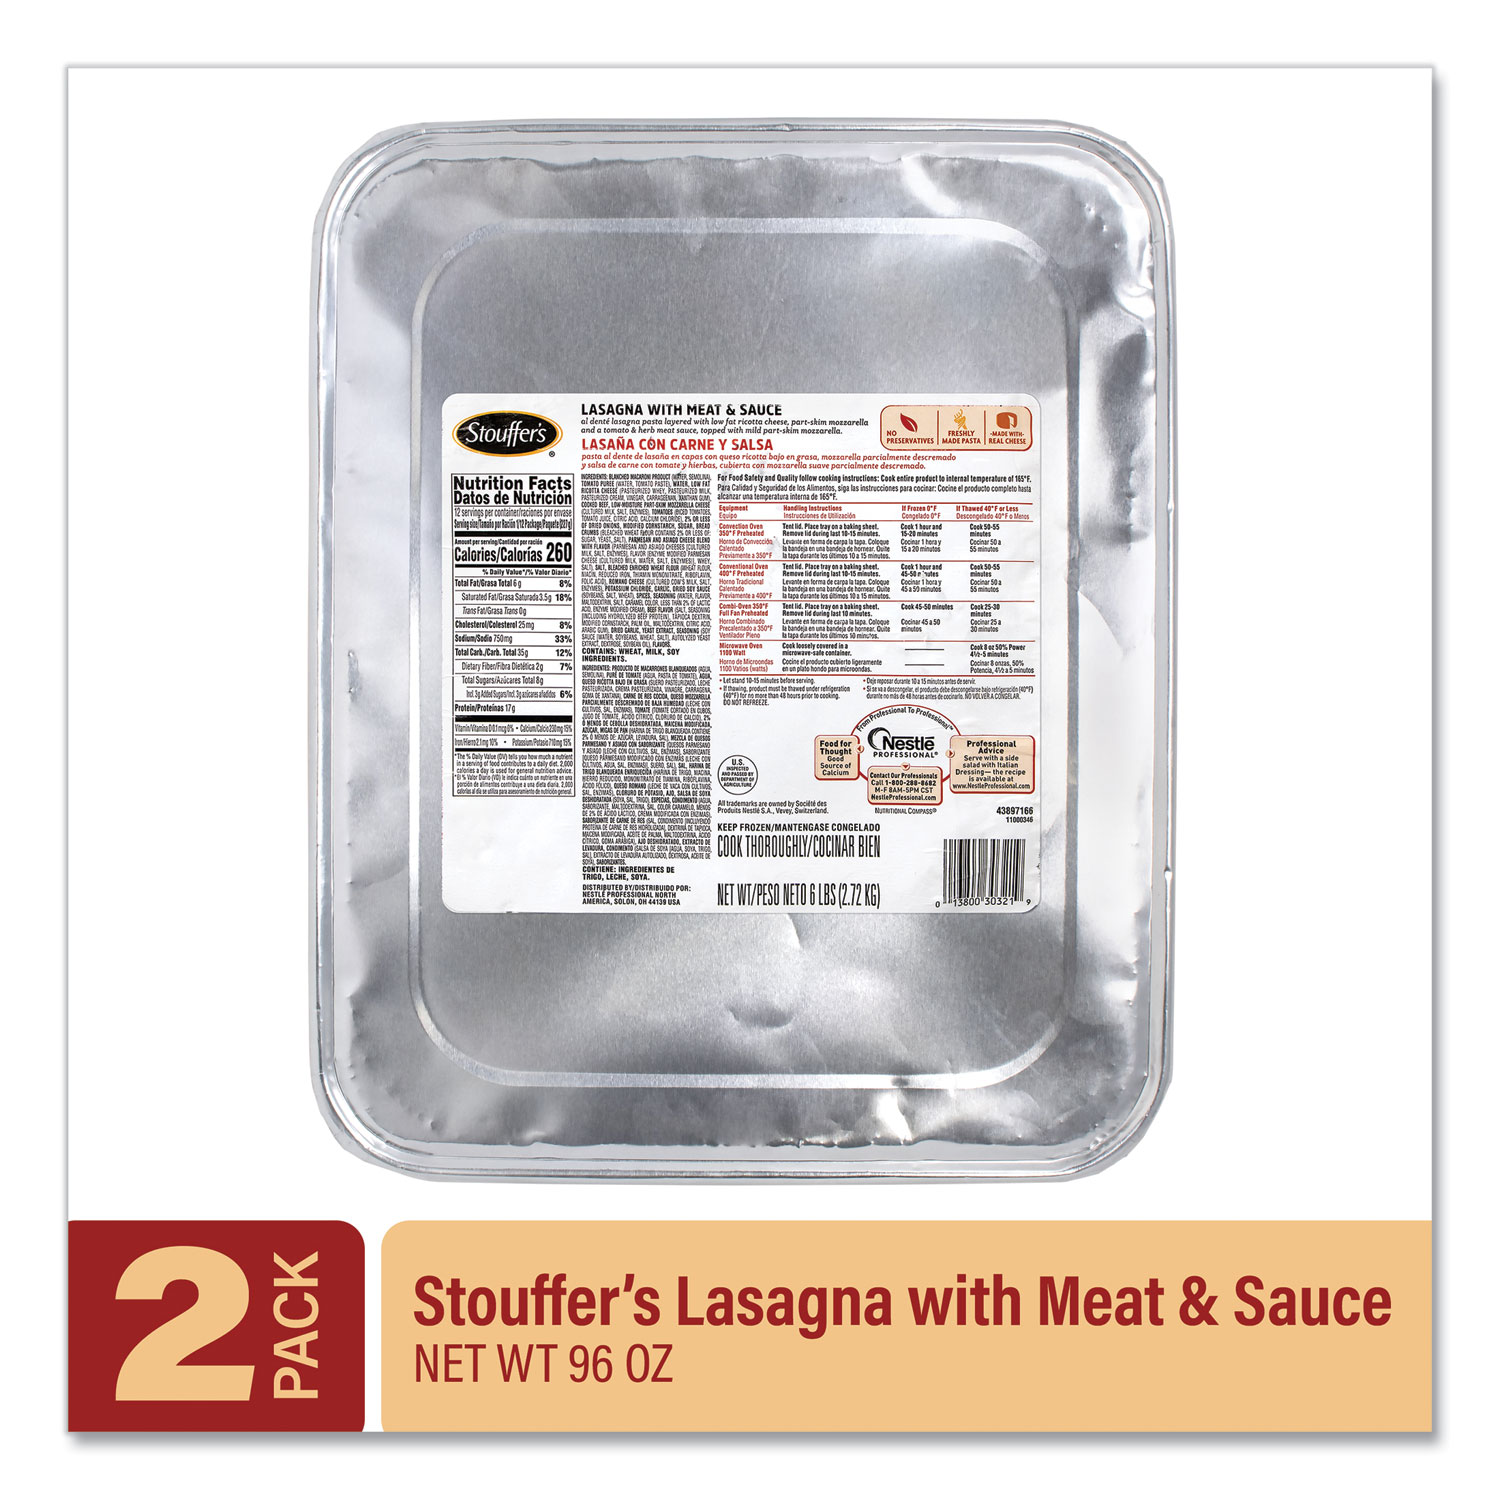  Stouffer's NES30321 Lasagna with Meat and Sauce, 96 oz Tray, 2/Pack, Free Delivery in 1-4 Business Days (GRR90300185) 